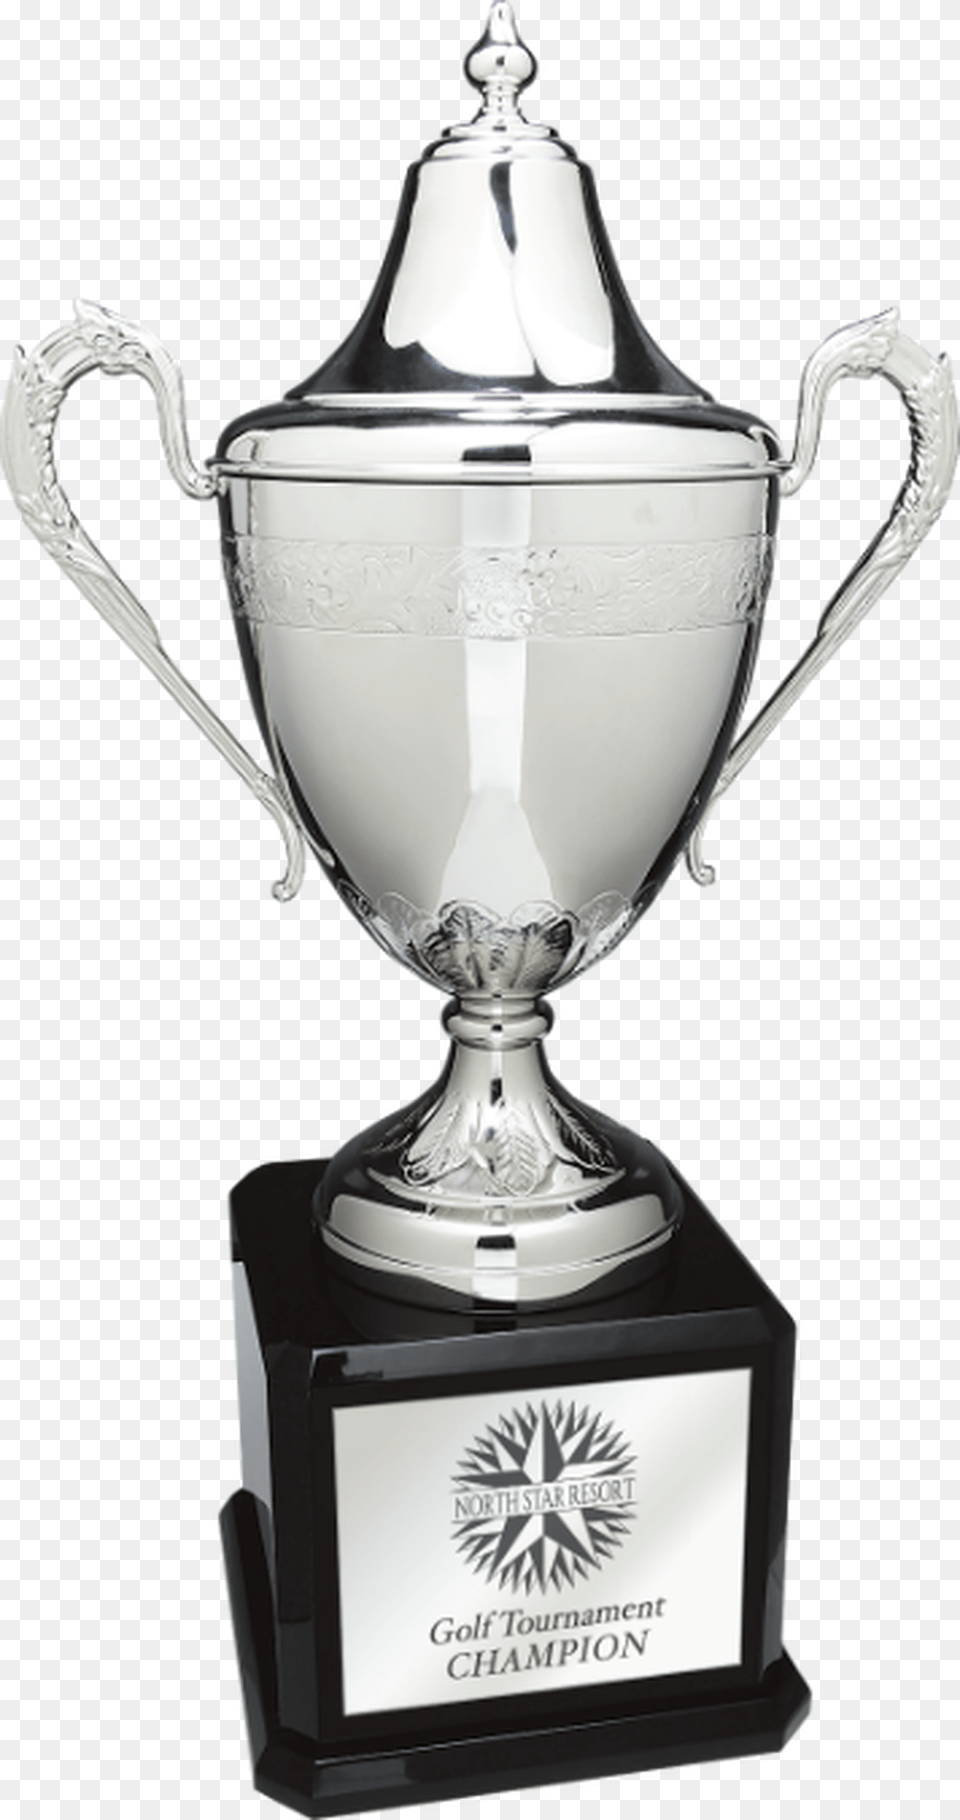 Swatkins Silver Hand Crafted Cup On Black Royal Piano Trophy Png Image